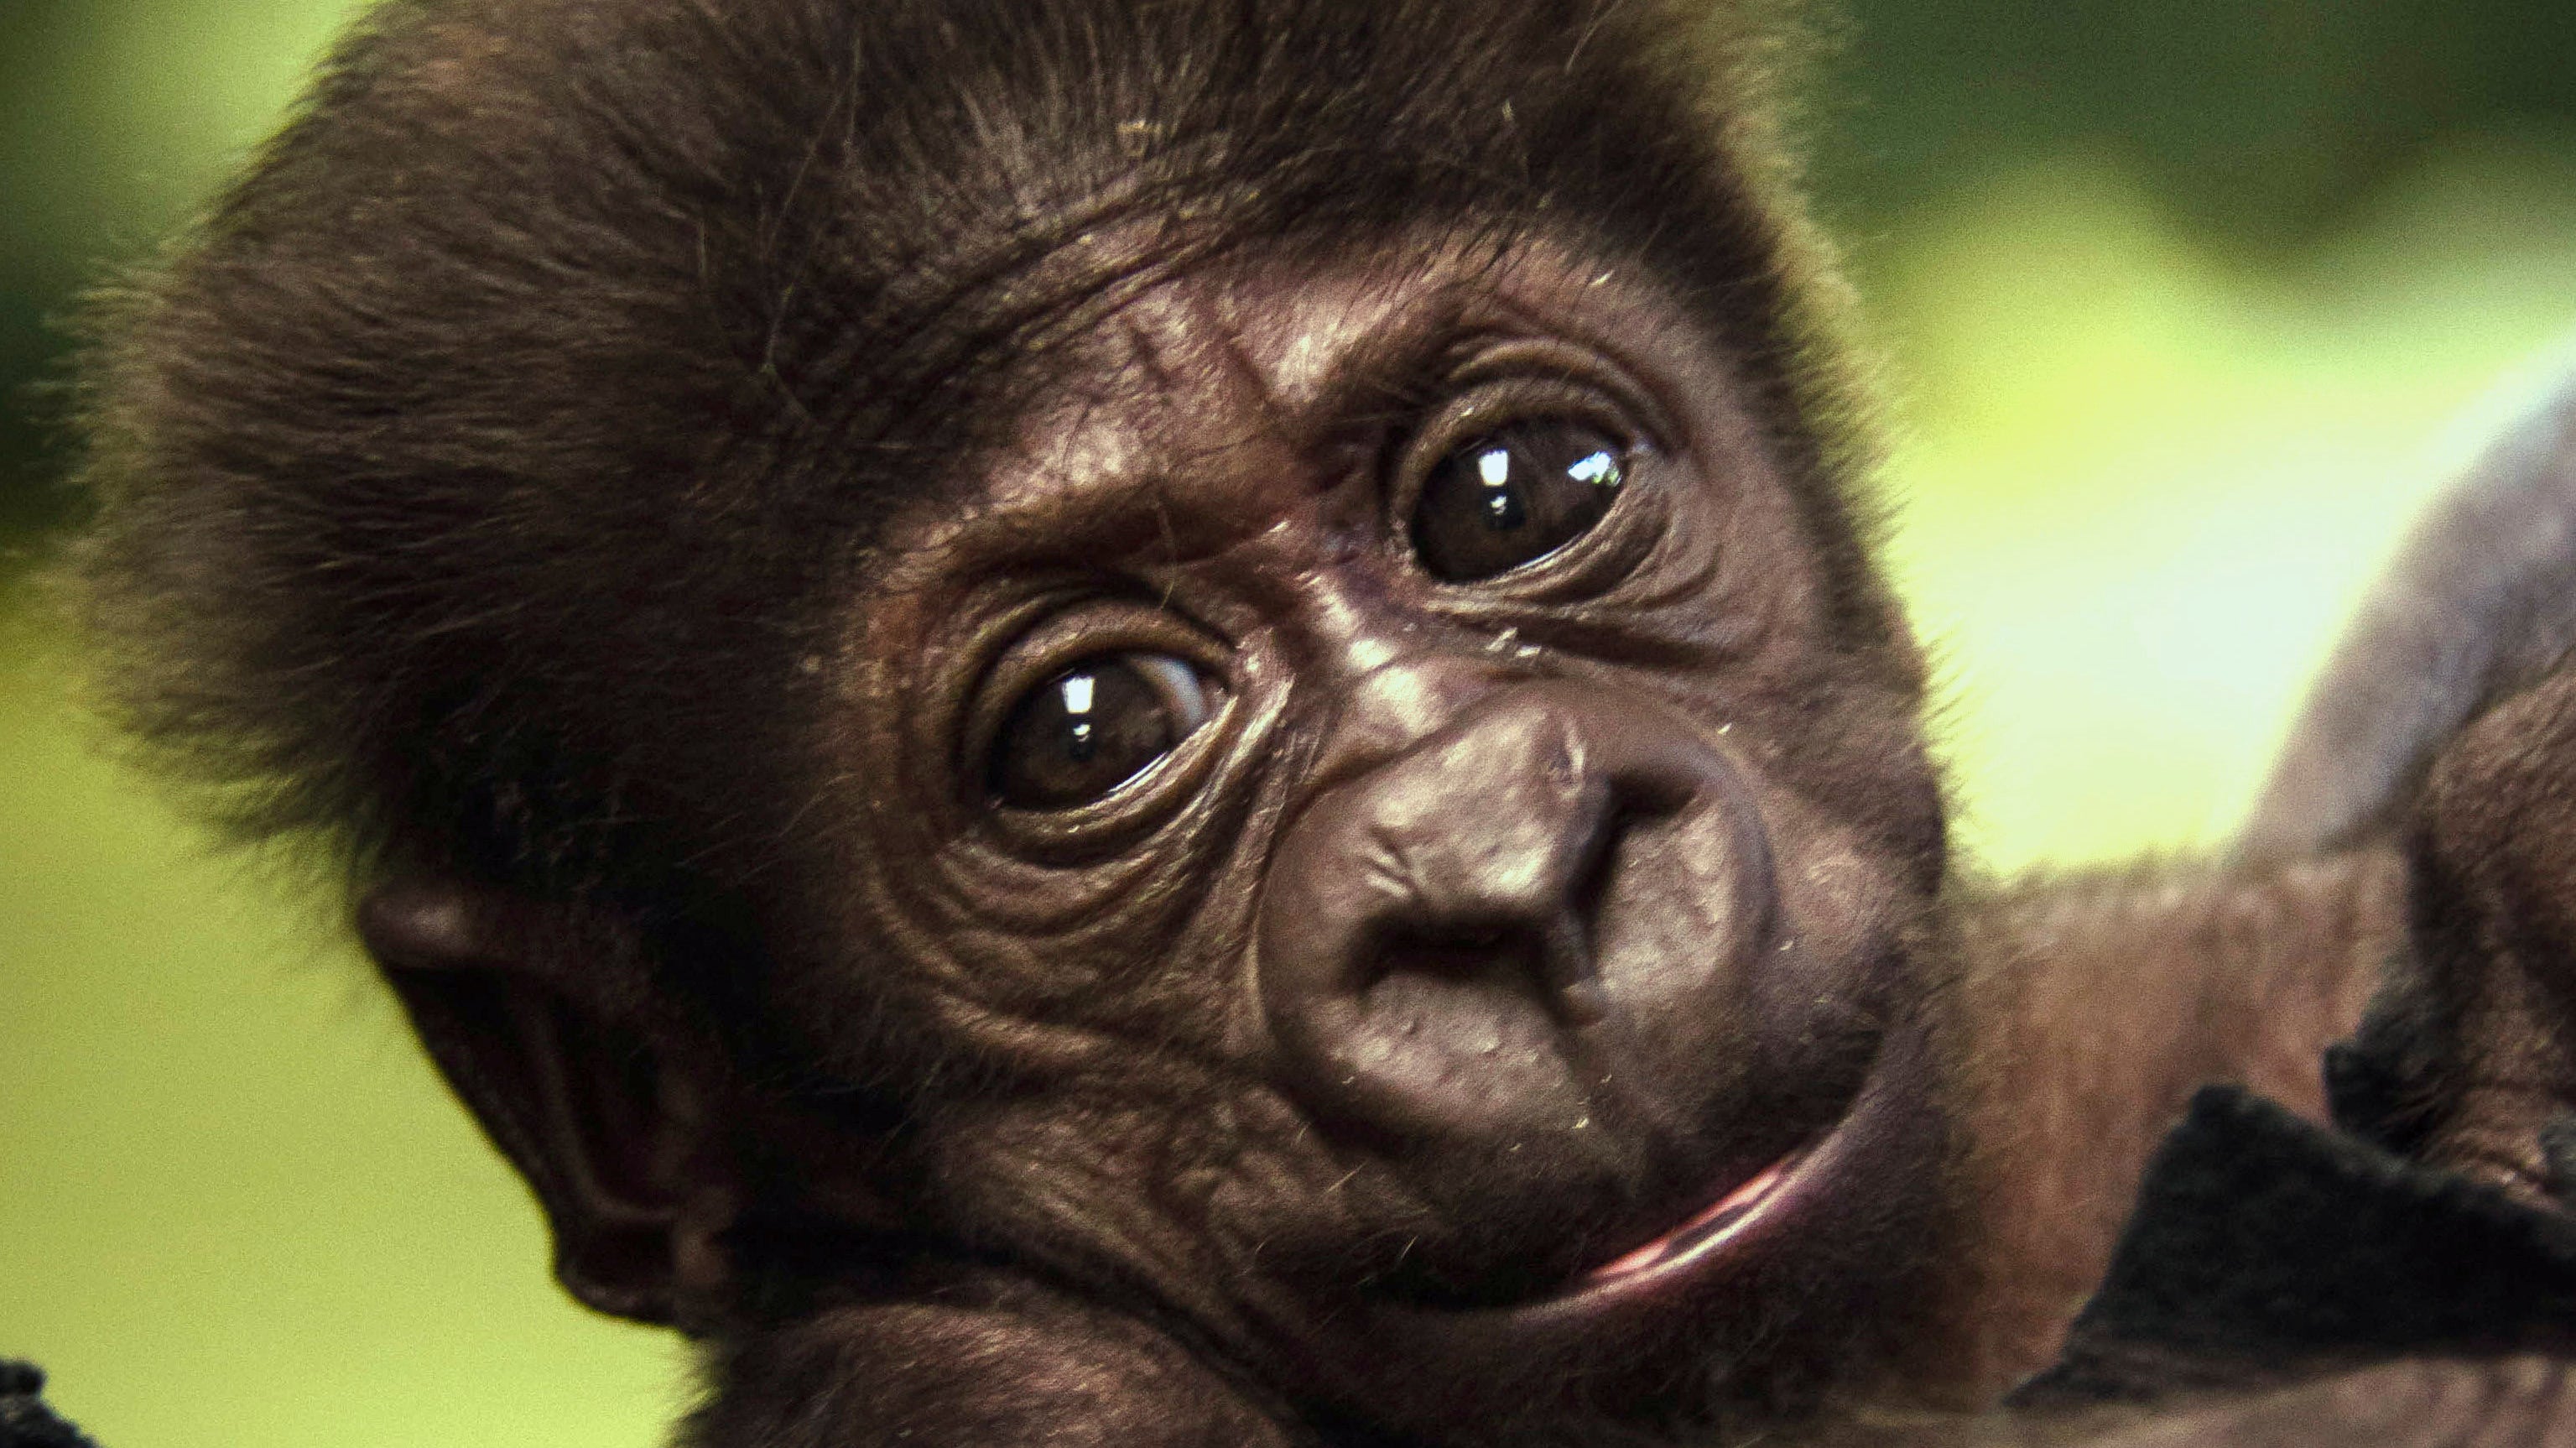 Young gorilla shunned by mother ready to switch zoos | Fox News3071 x 1726